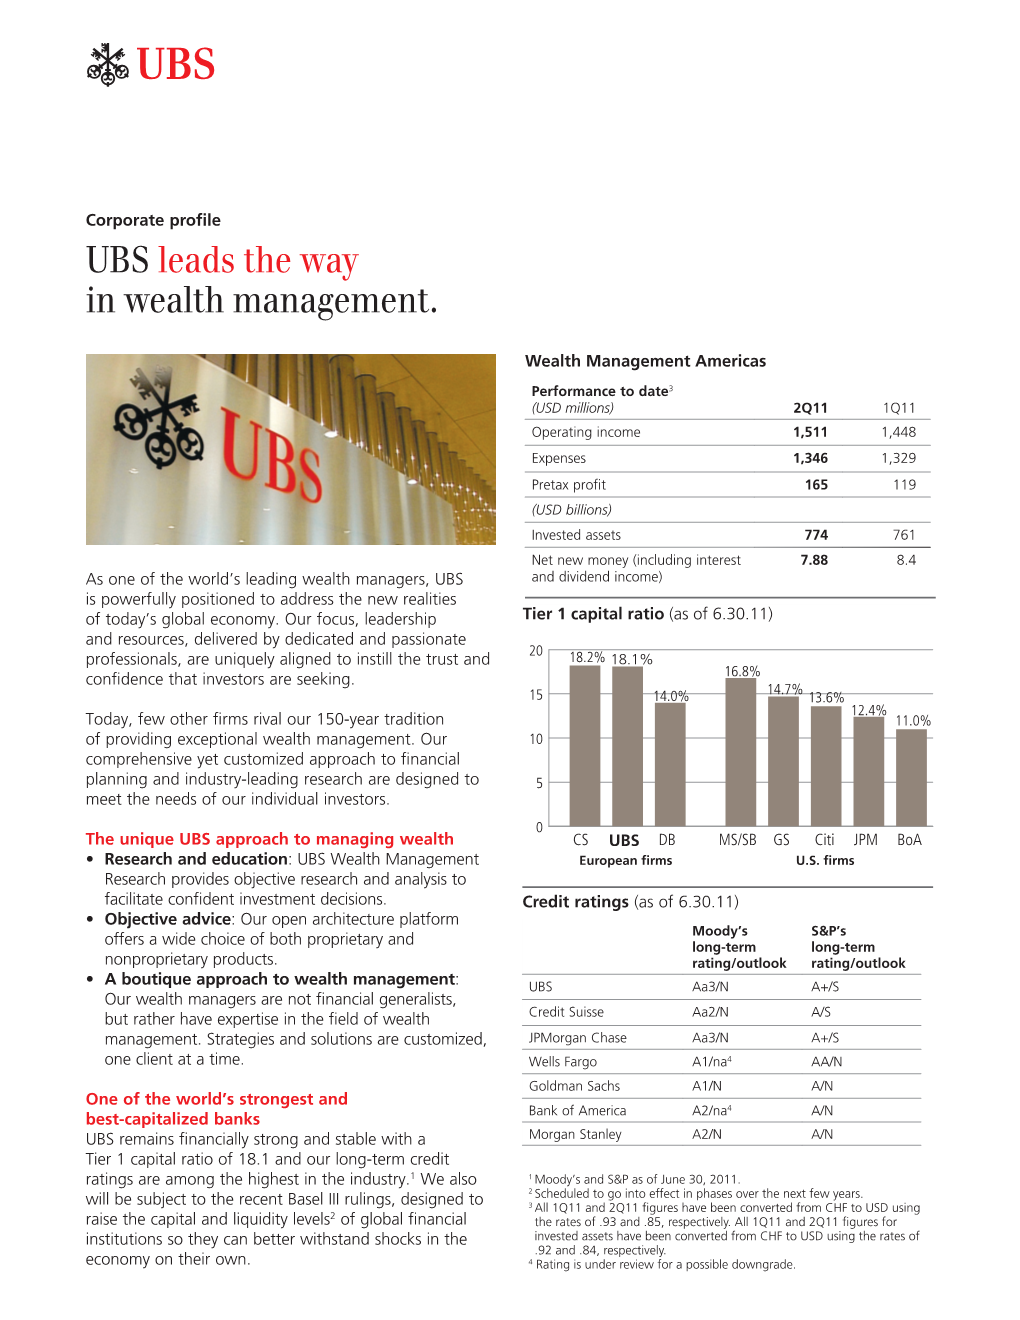 UBS Leads the Way in Wealth Management